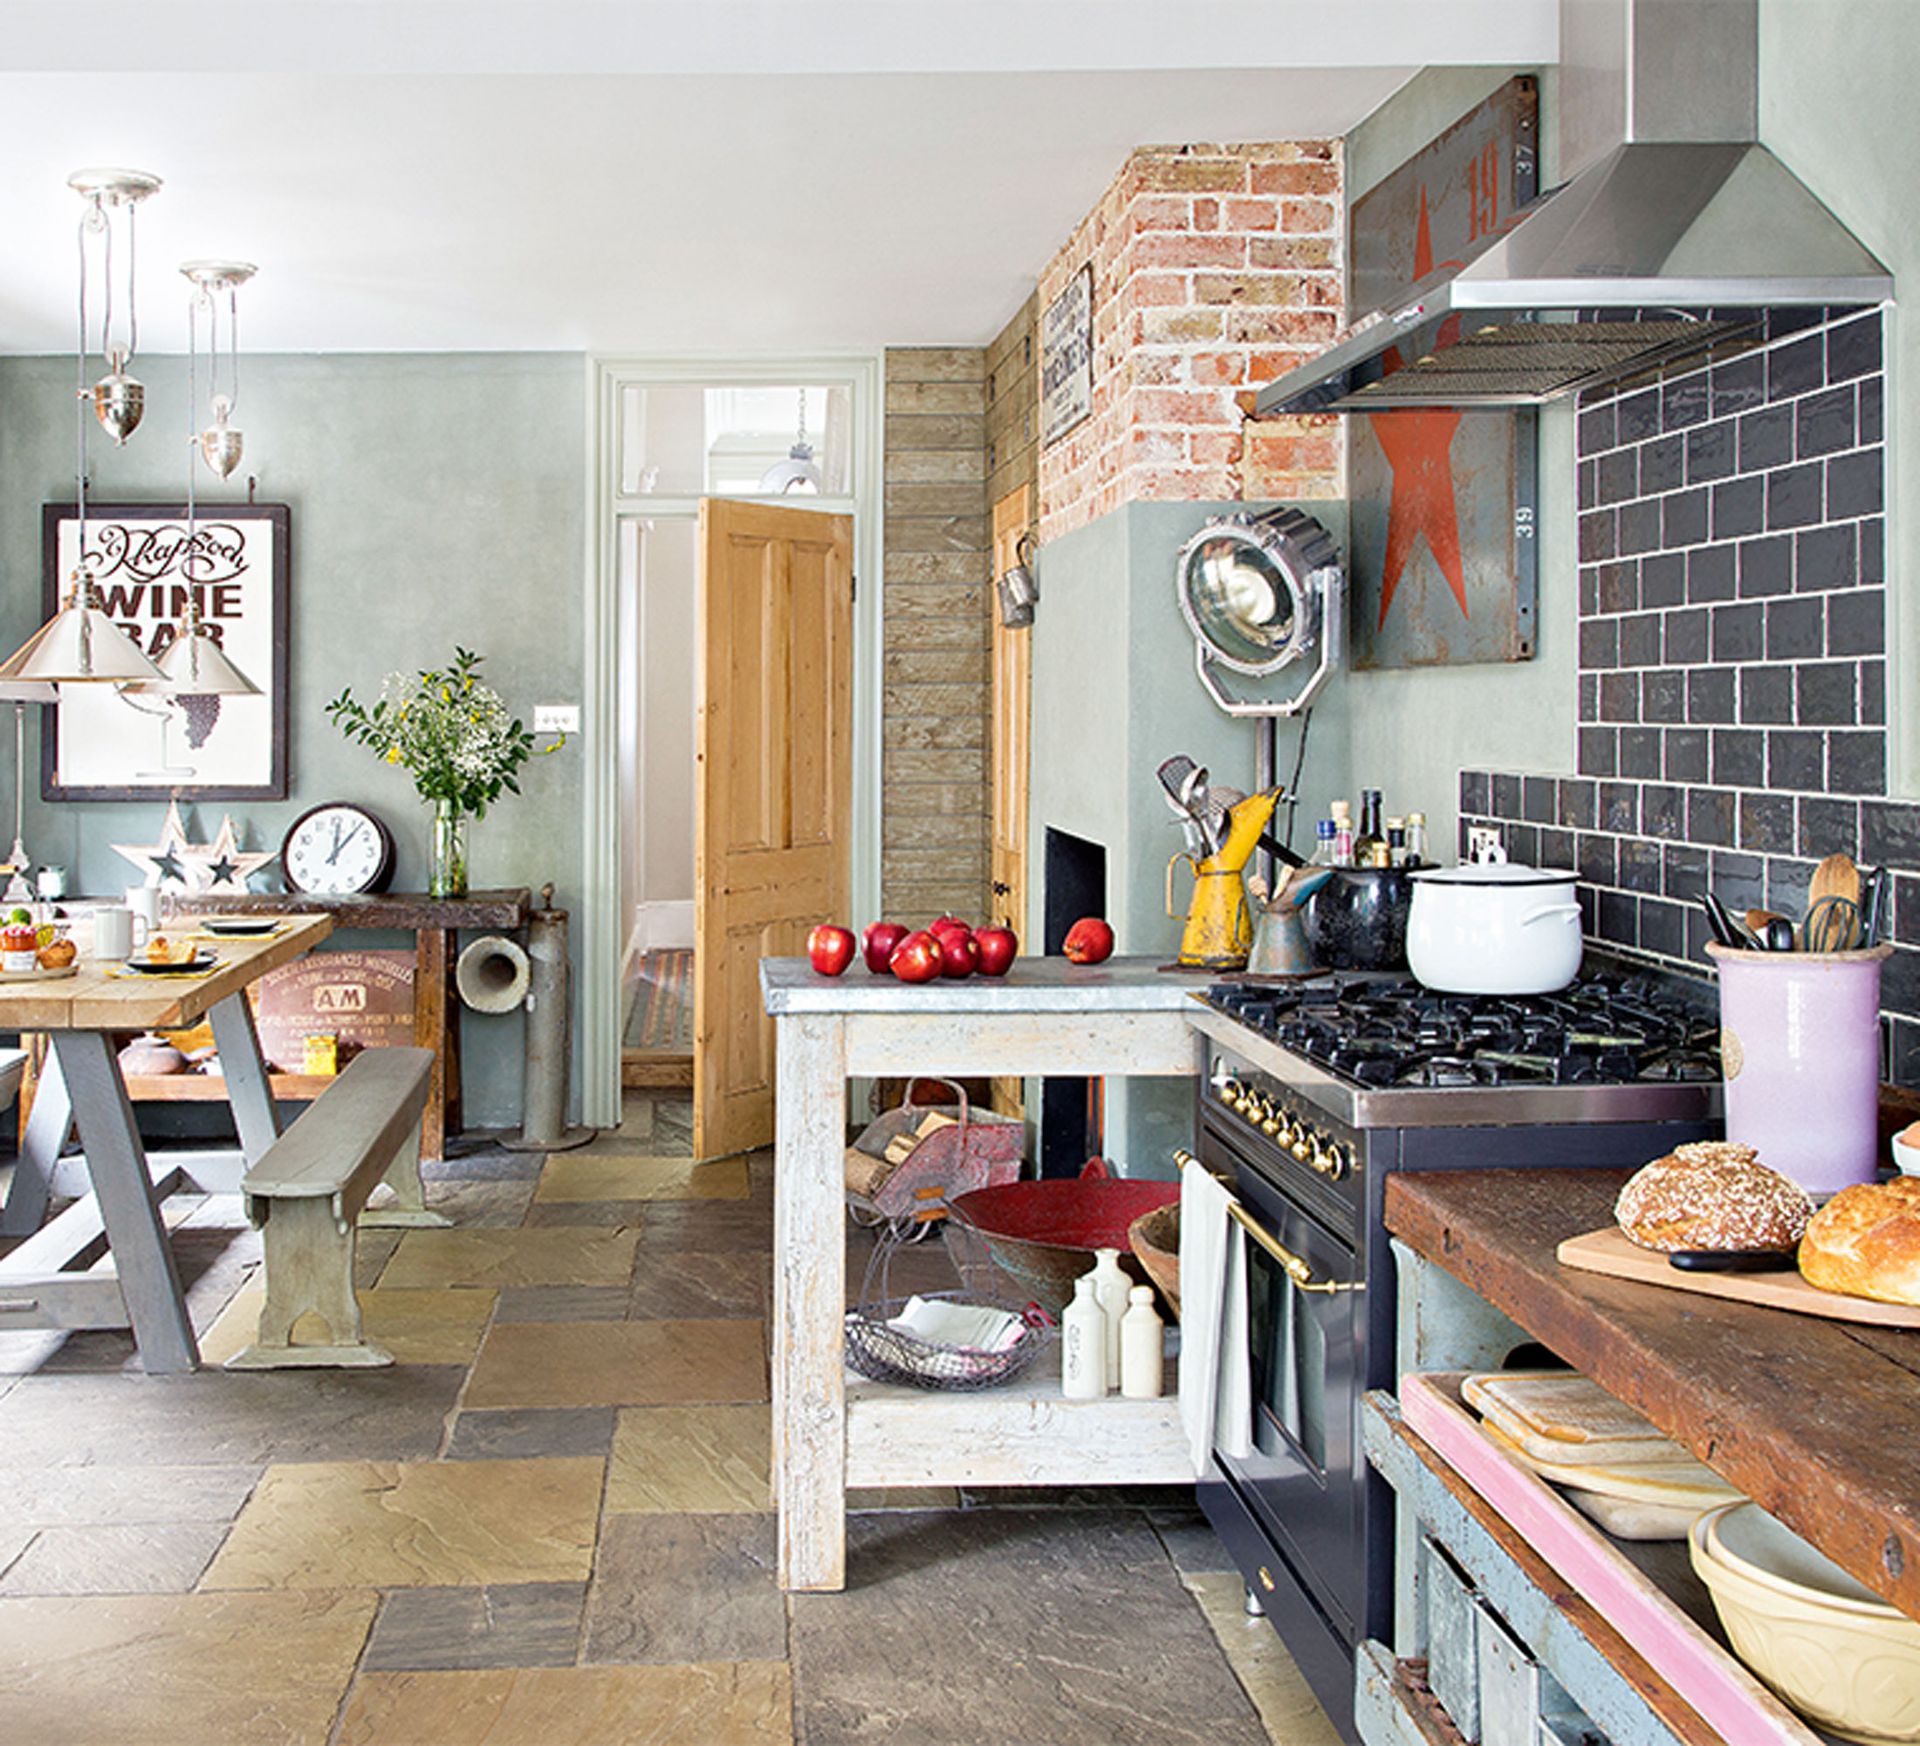 Shabby chic kitchen ideas - easy ways to create this relaxed, eclectic look